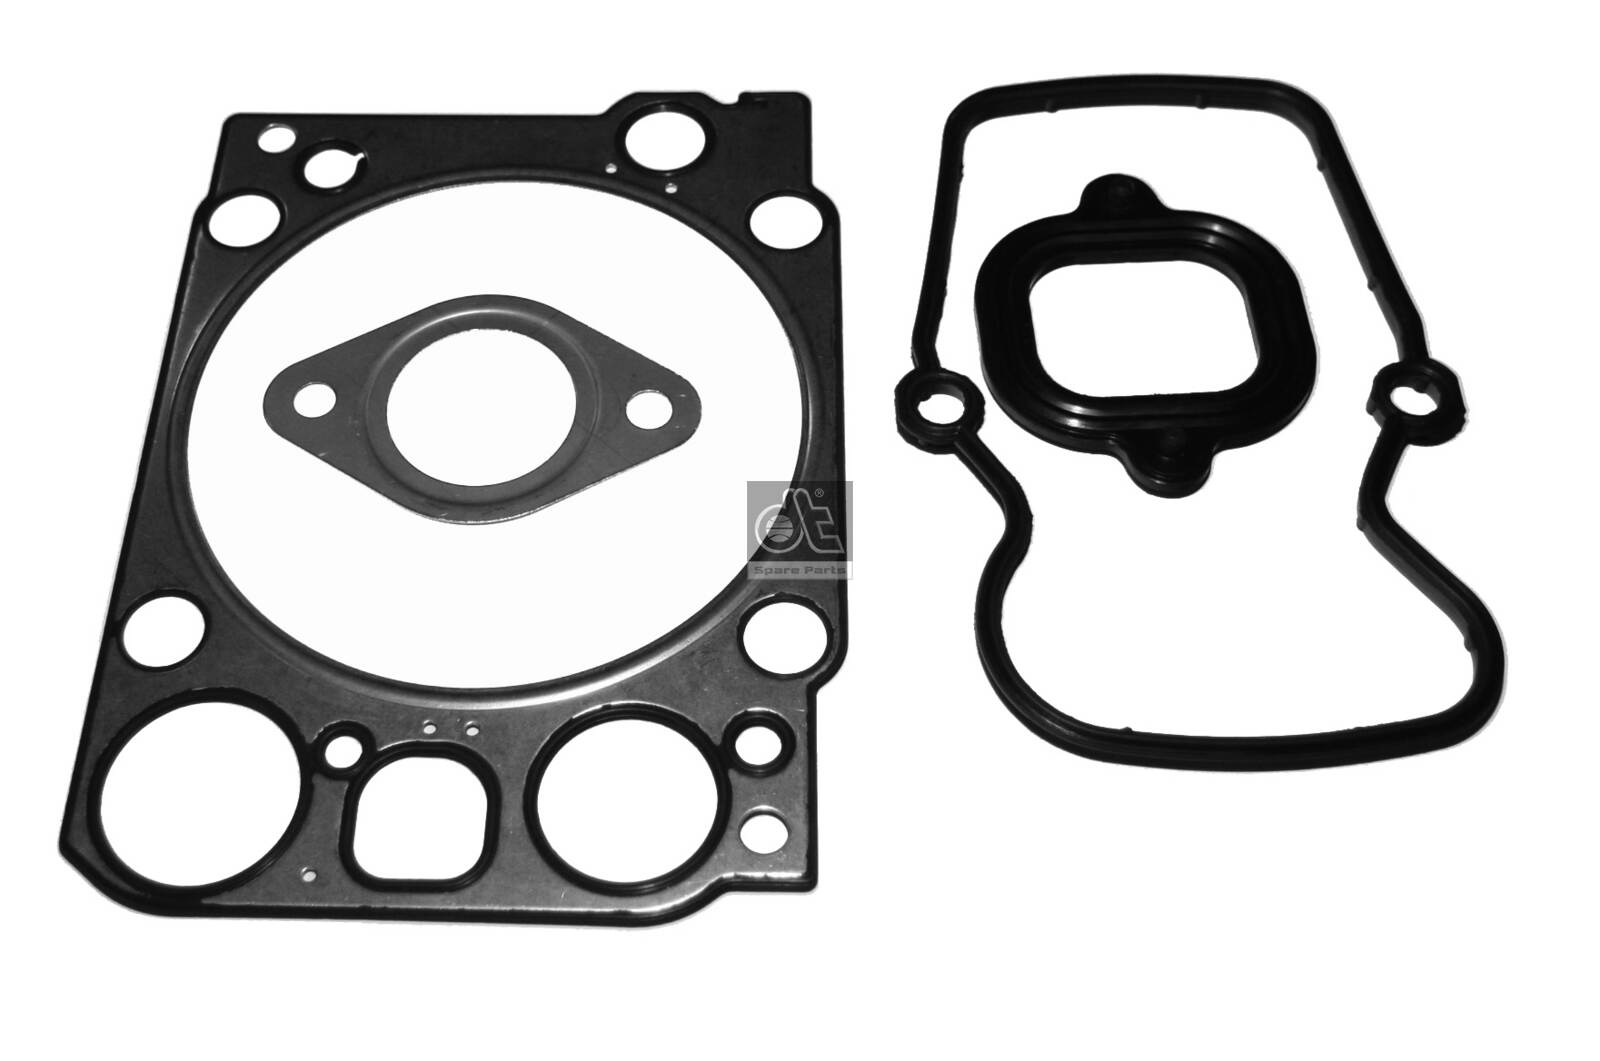 4.90853, Gasket Kit, cylinder head, DT Spare Parts, A4570104220, A4570106220, 4570104220, 4570106220, 001.830, 011.504, 0143545, 033419003, 0340010008, 4057795567580, 8606507, 91261, T8000591, 001.832, 011504, 01.43.545, 1251407, 4057795593213, 8606506, 001830, 4047755748173, 86065.07, 001832, 03-34190-03, 86065.06, 0001832, 86065, 122.800, 122800